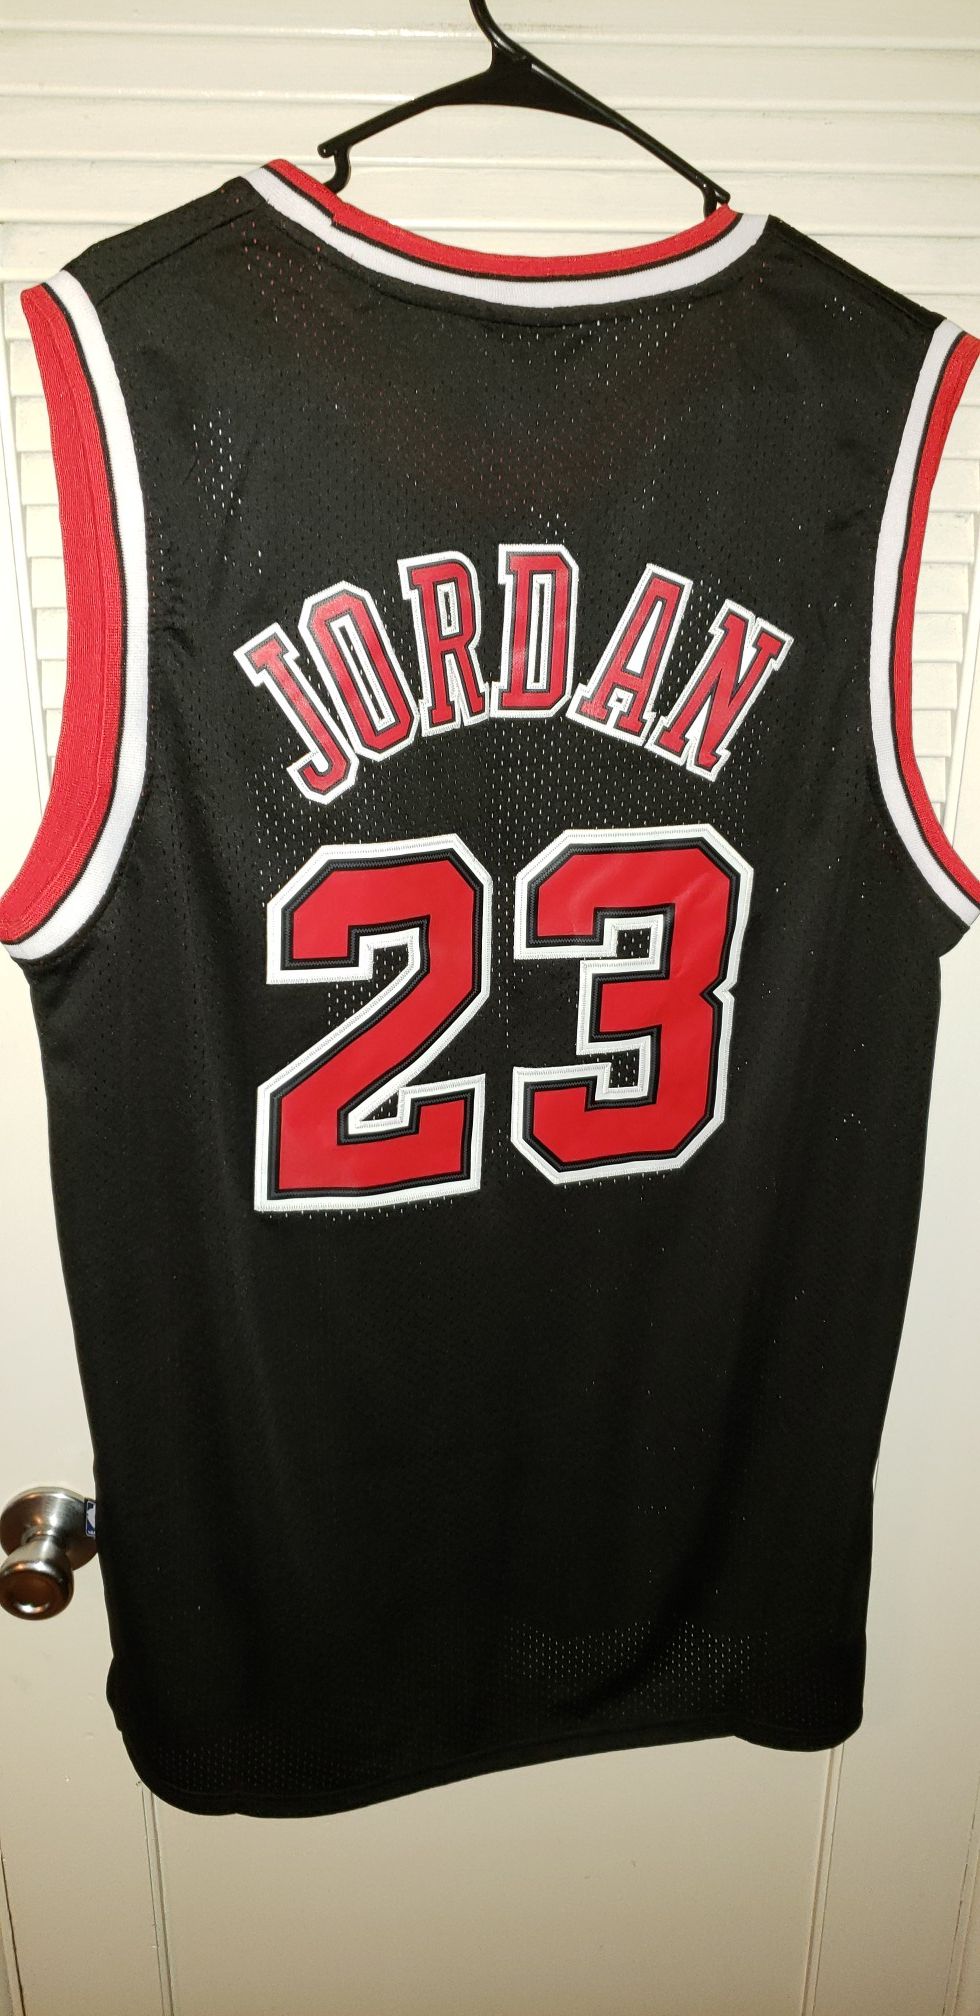 Men's XXL Michael Jordan Chicago Bulls Jersey New with Tags Stiched Nike $45. Ships +$3. Pick up in West Covina